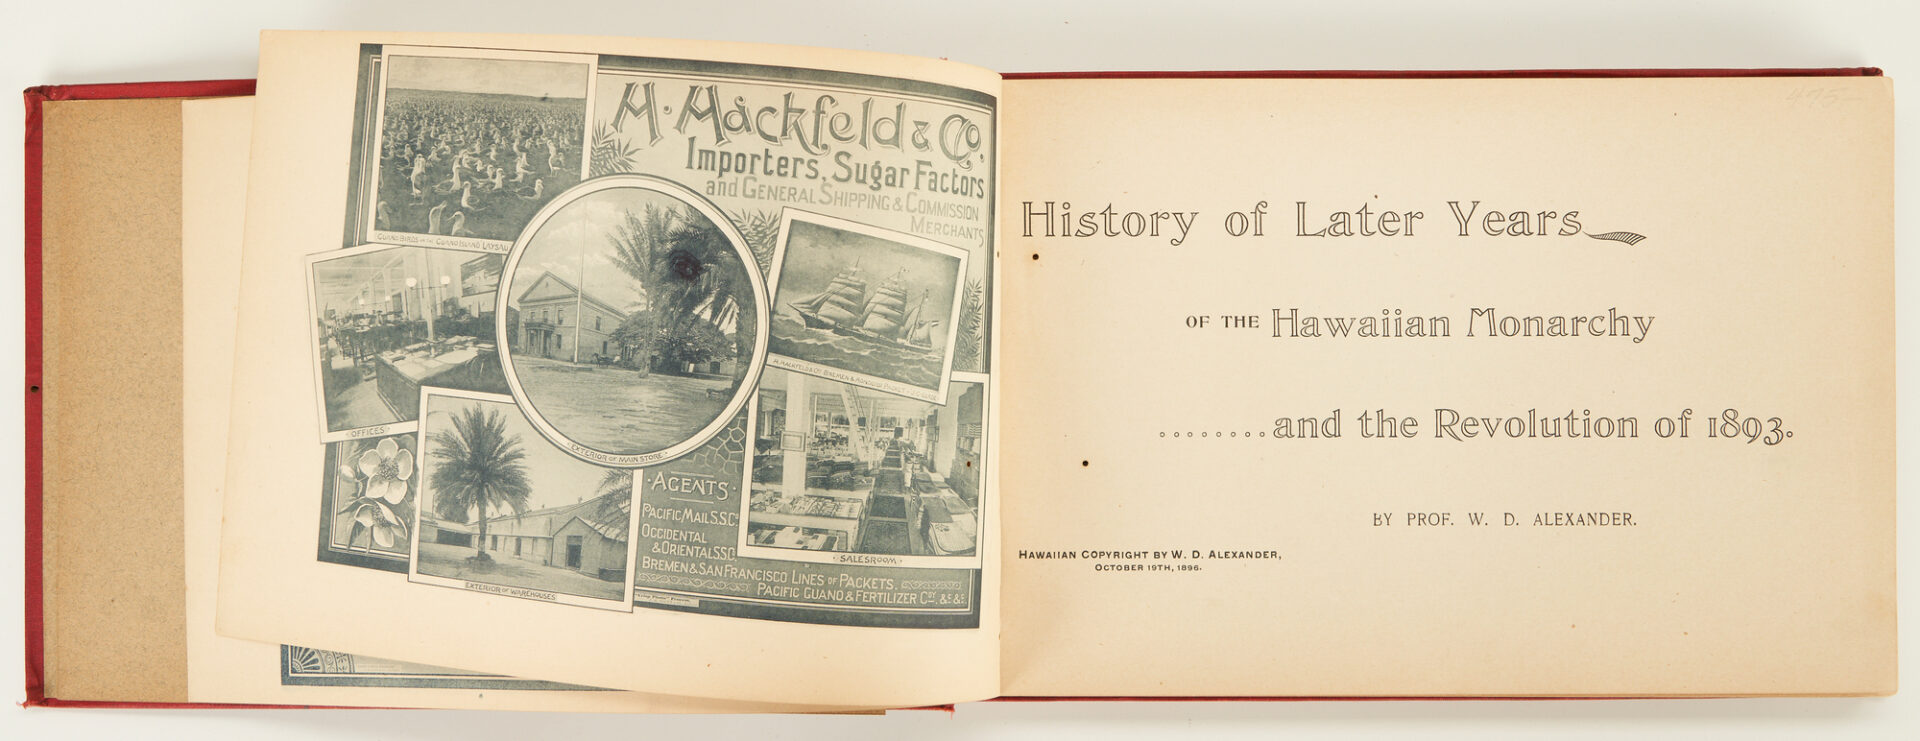 Lot 703: 7 Hawaii History Related Books 1843-1915